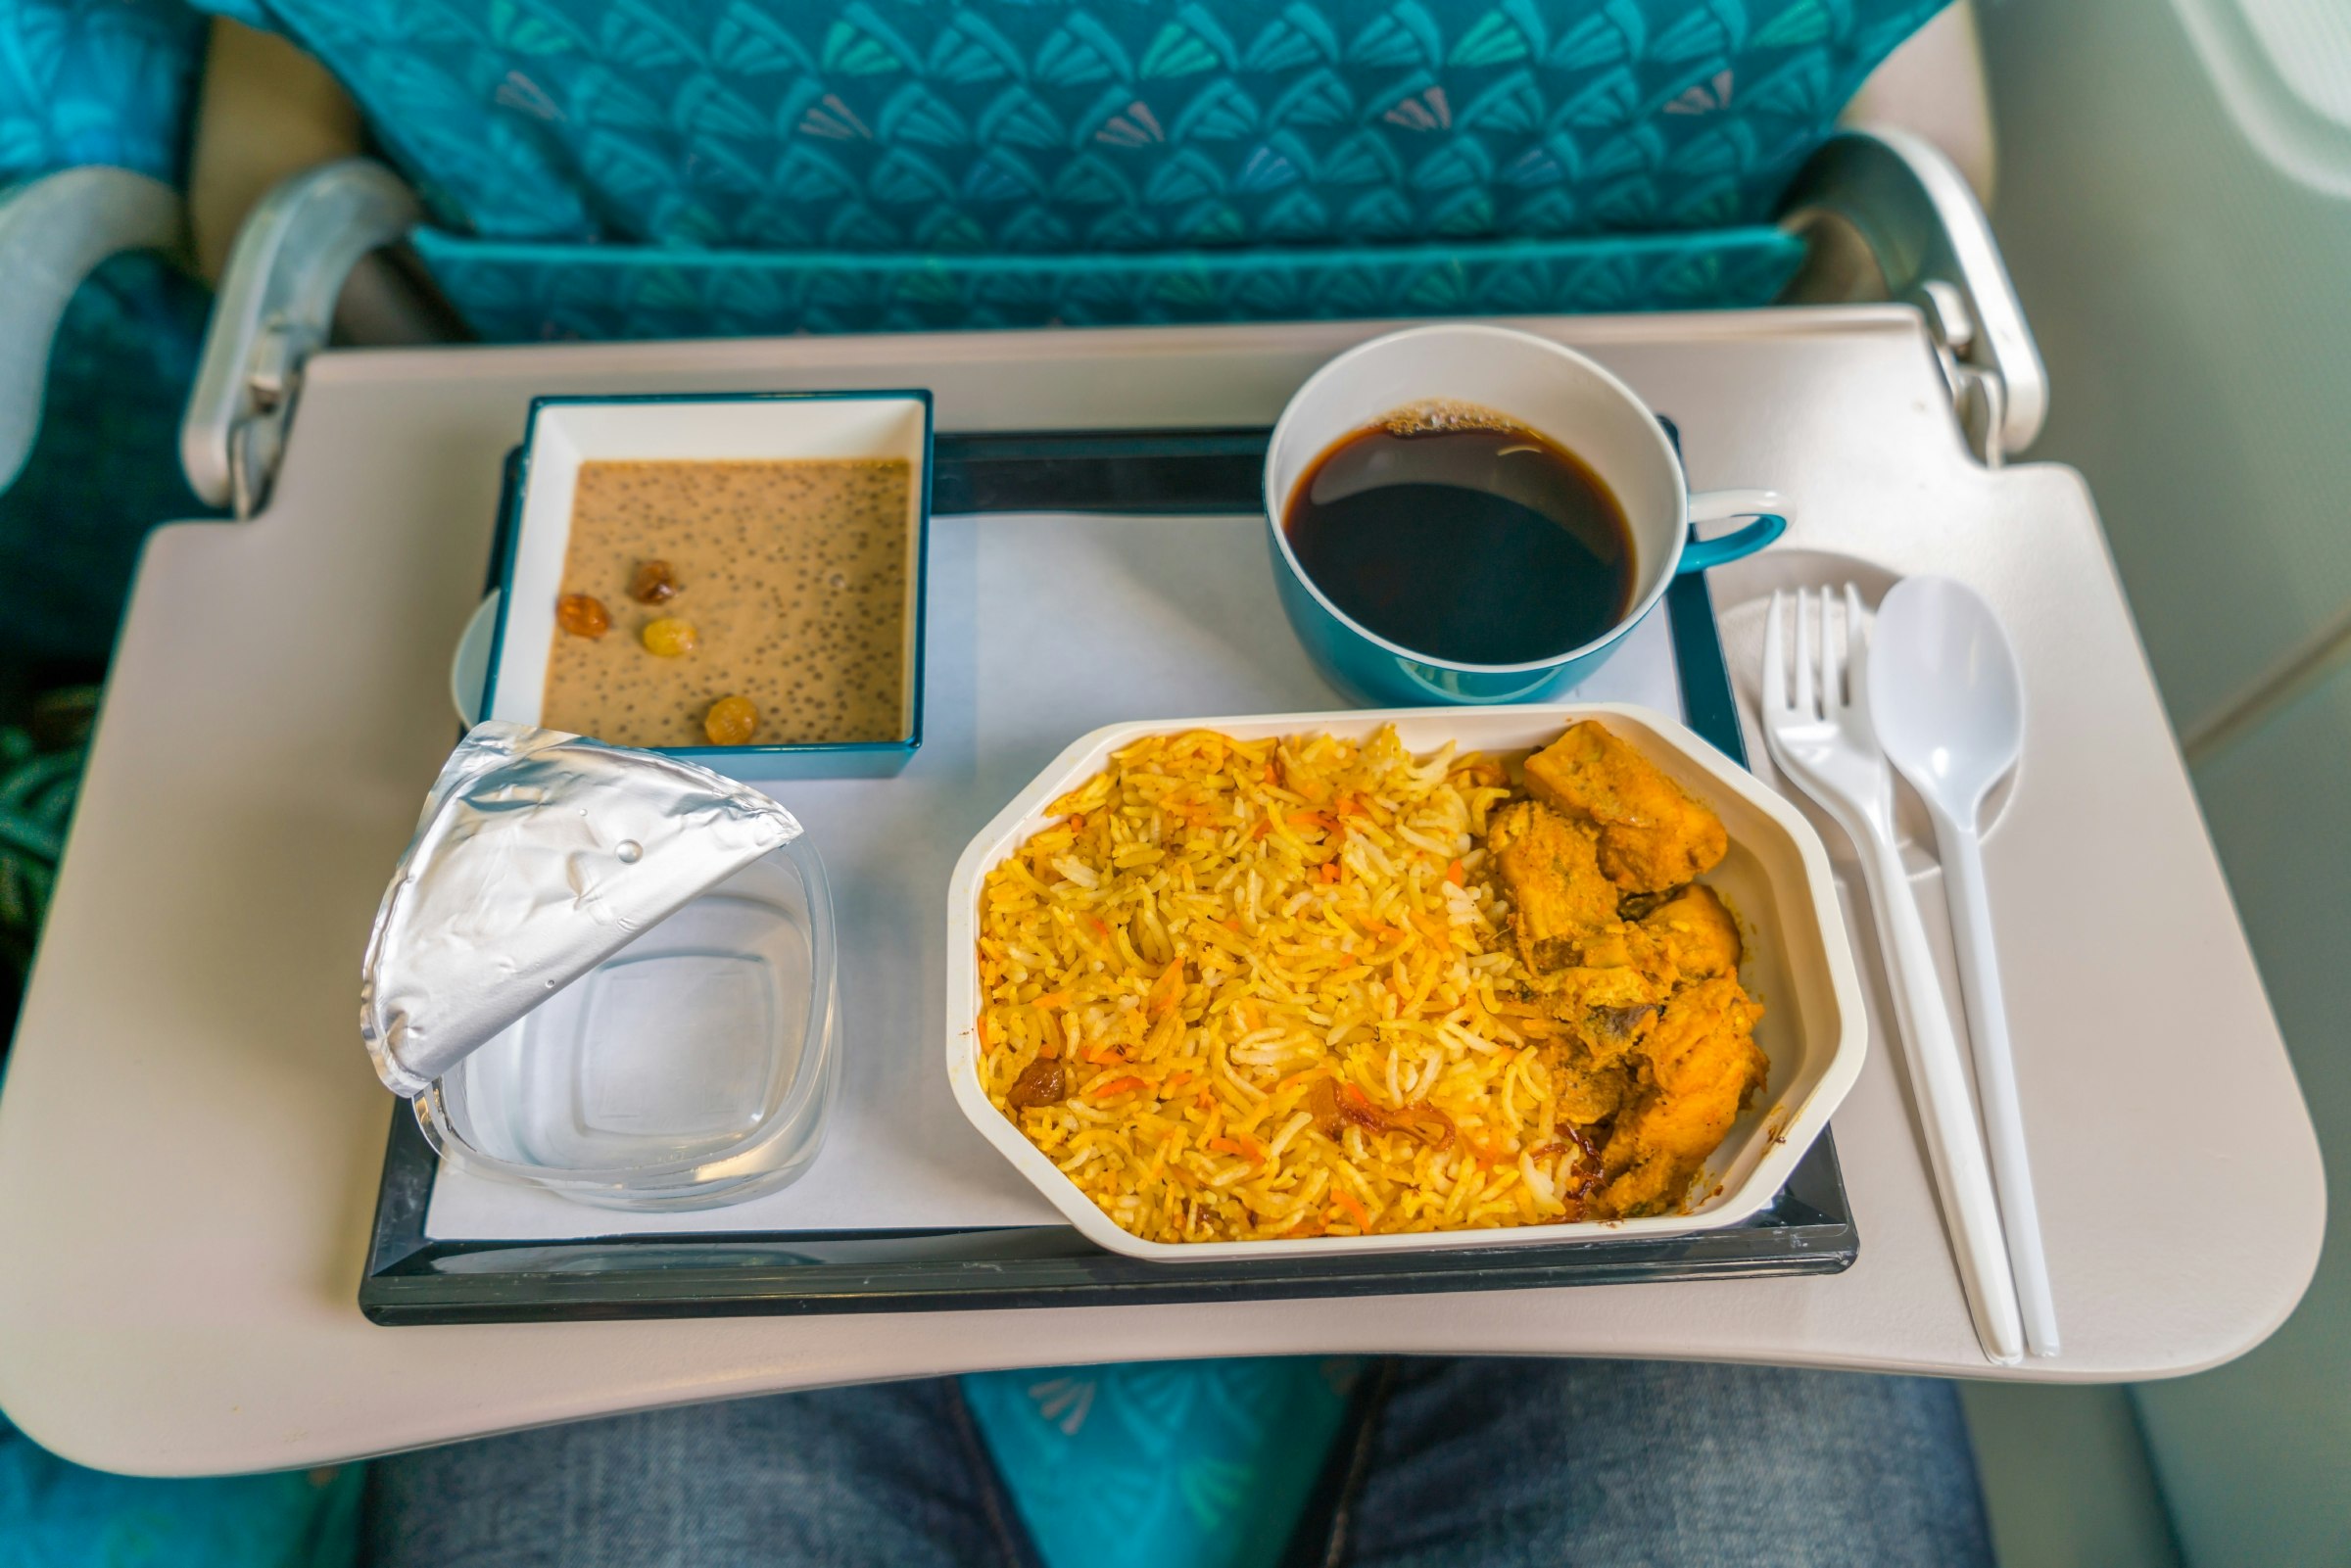 A curry and coffee on a tray on an airplane